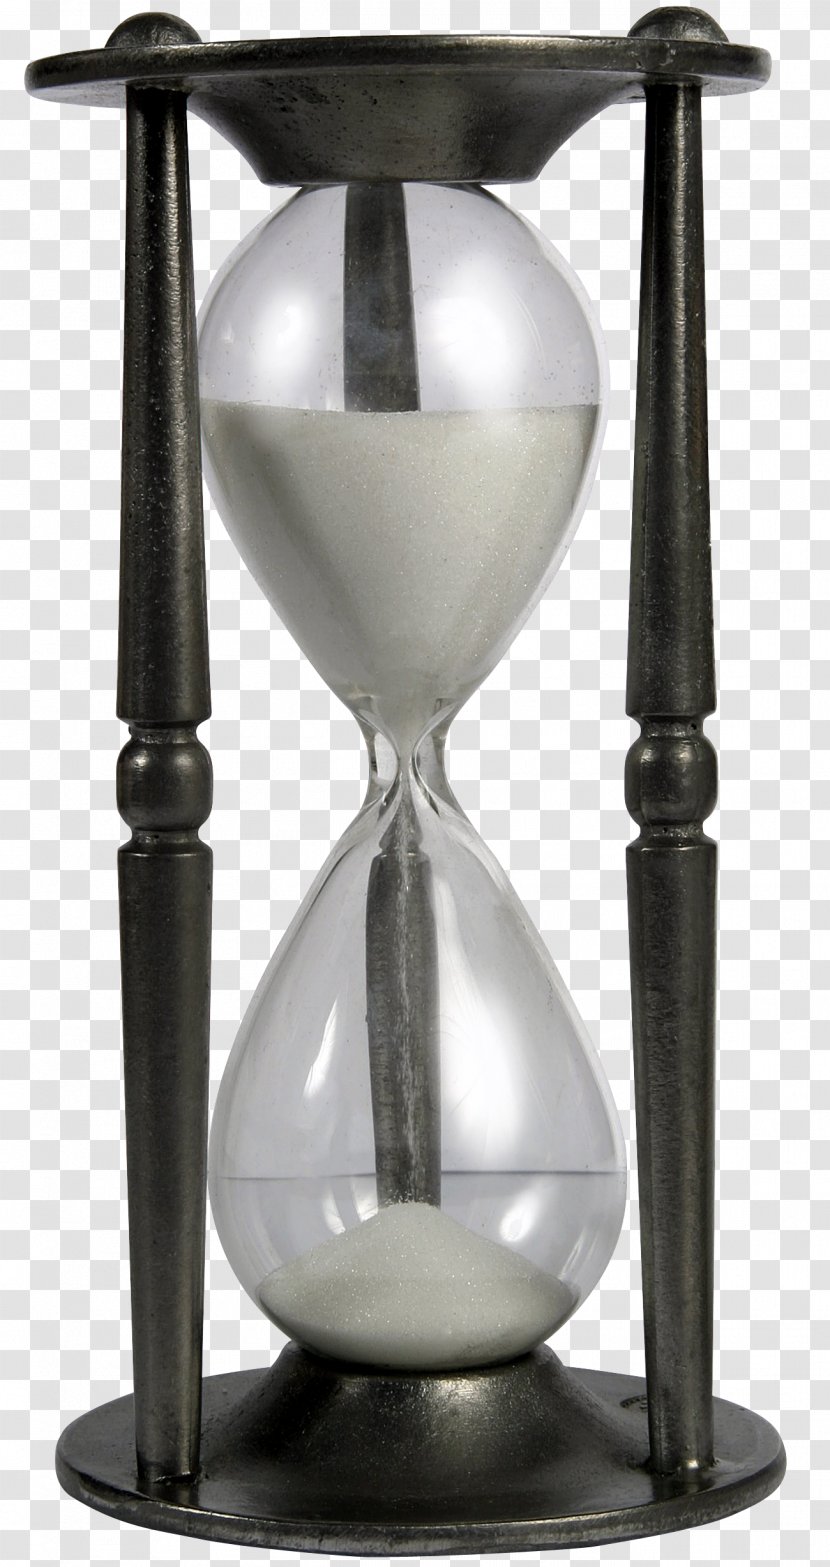 Hourglass Clock Timer Clip Art - Transparency And Translucency Transparent PNG